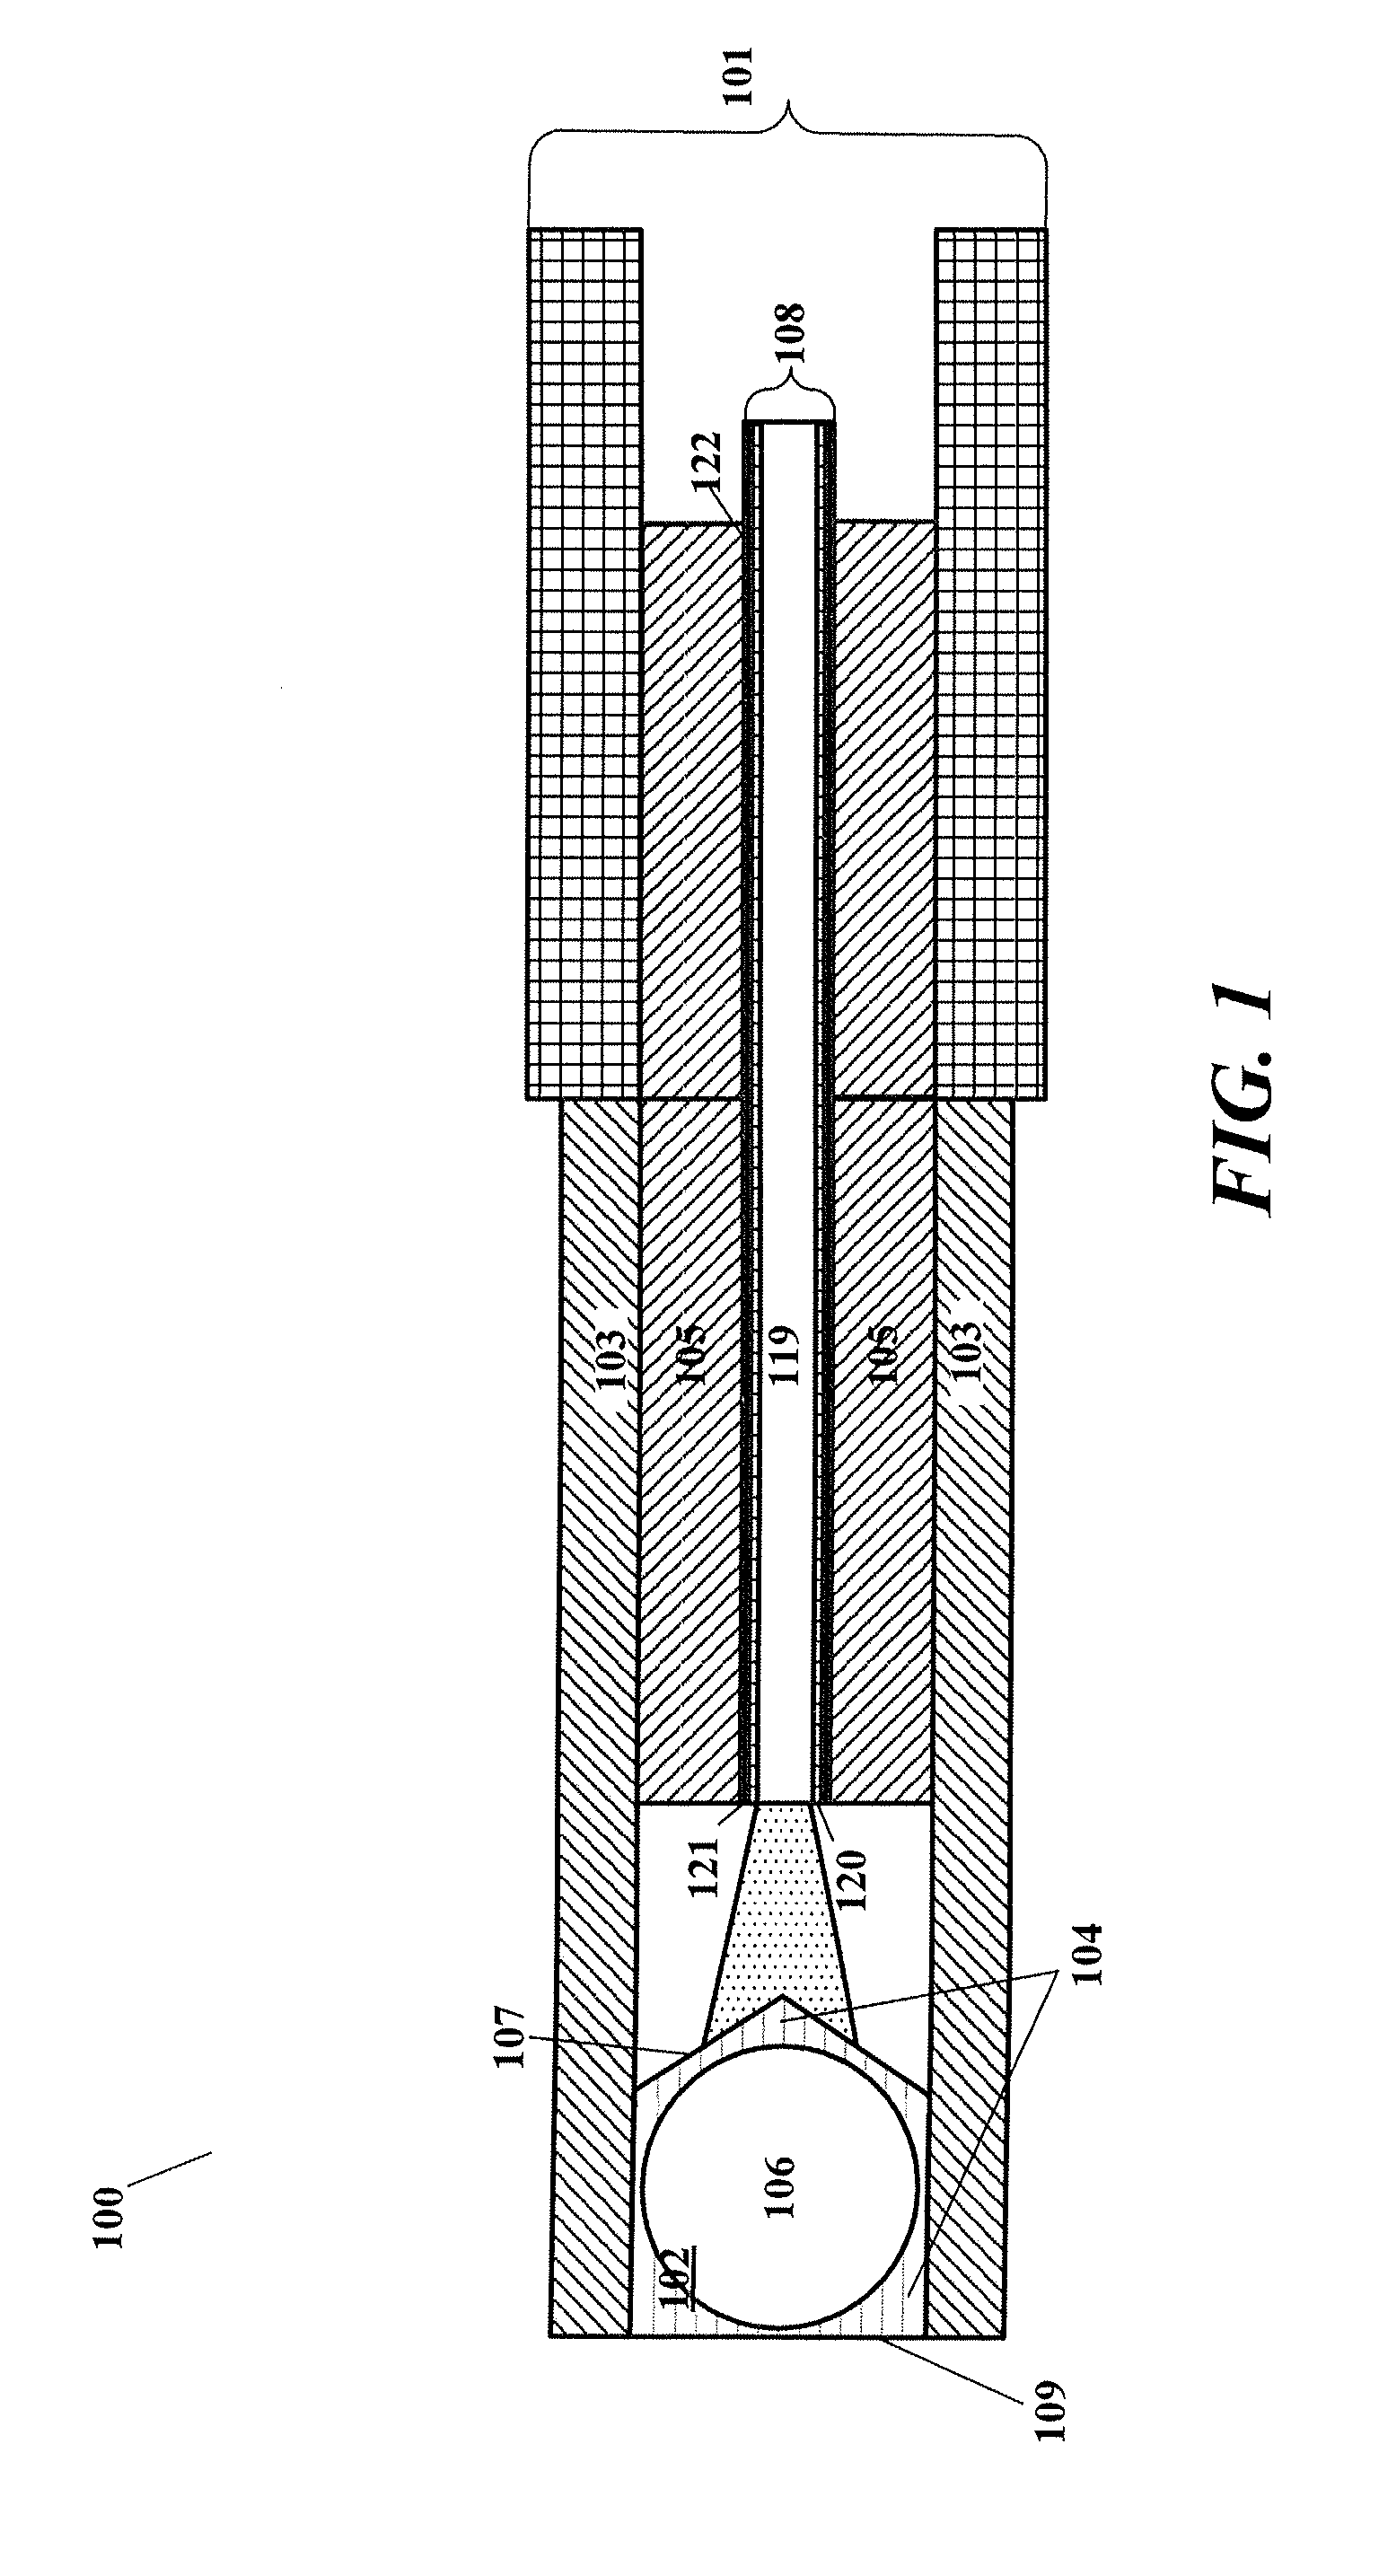 Multi-spot laser probe with micro-structured distal surface